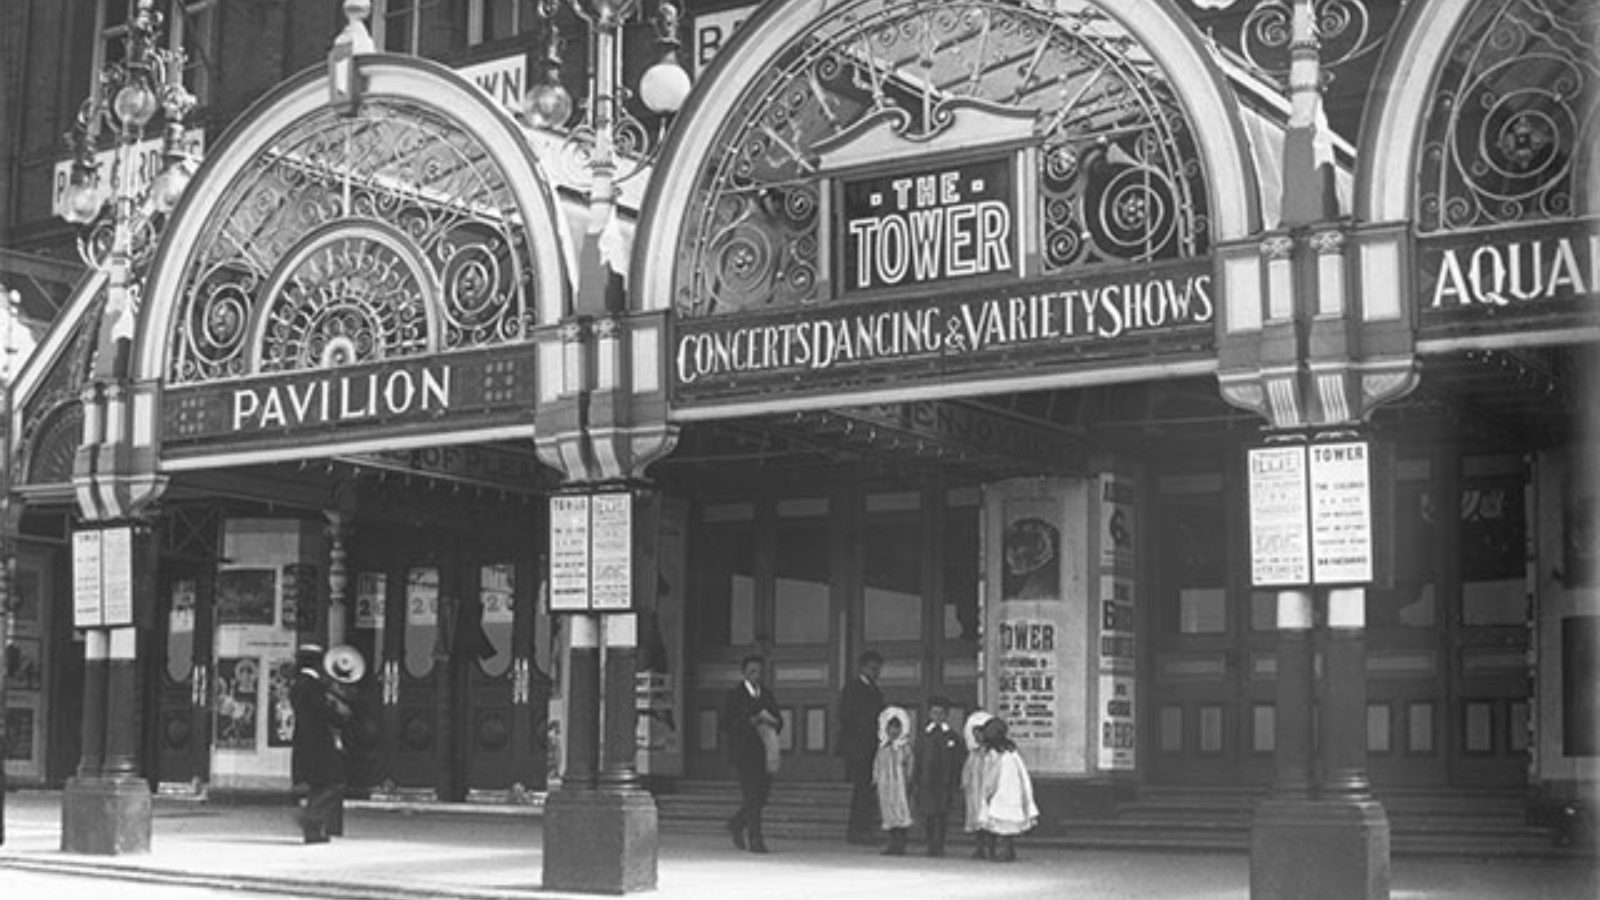 Entrance to the Blackpool Tower building with signs for 'Pavilion, Concerts, Dancing & Variety Shows.'